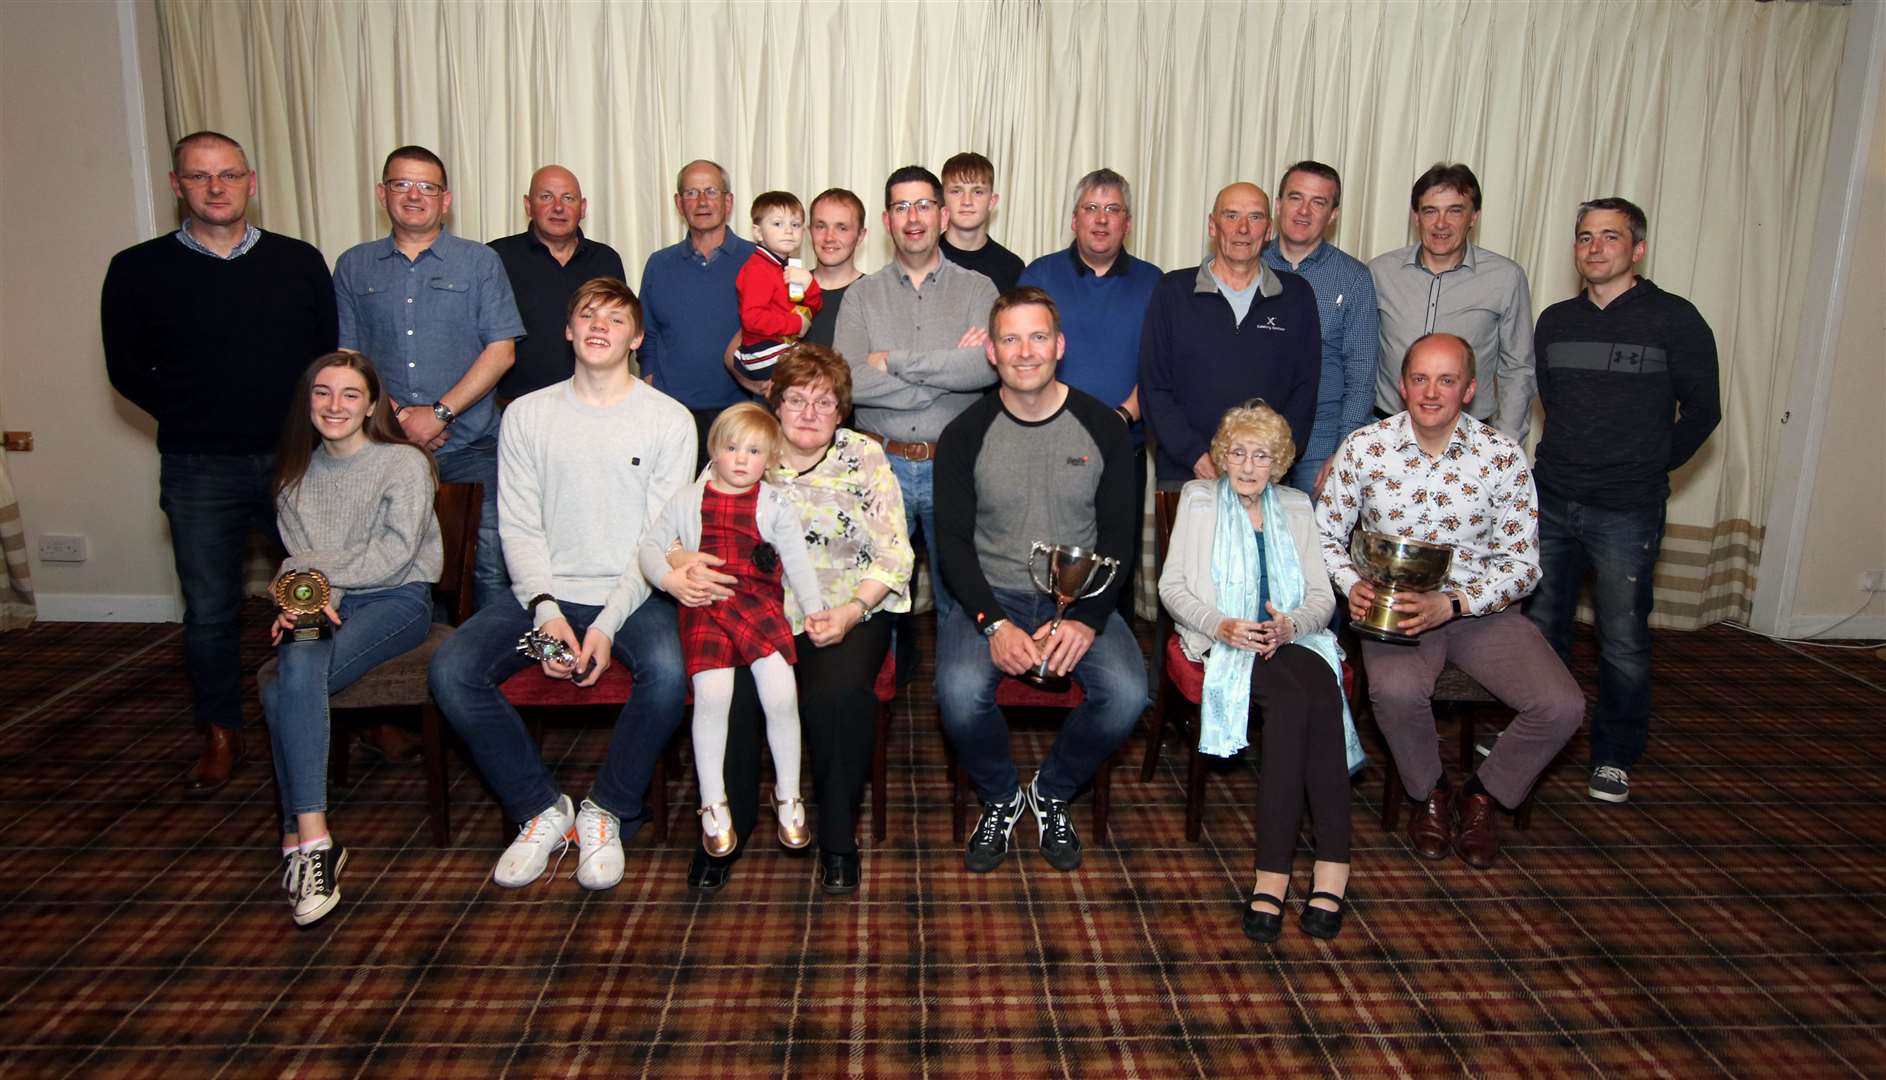 Mackay Golf Challenge trophy winners and other competitors, along with Irene Mackay and Margaret Mackay who presented the trophies. Front (from left): Lucie Green, John Mackay, Irene Mackay, Aly MacKay (overall champion), Margaret Mackay and Andrew Mackay. Picture: James Gunn